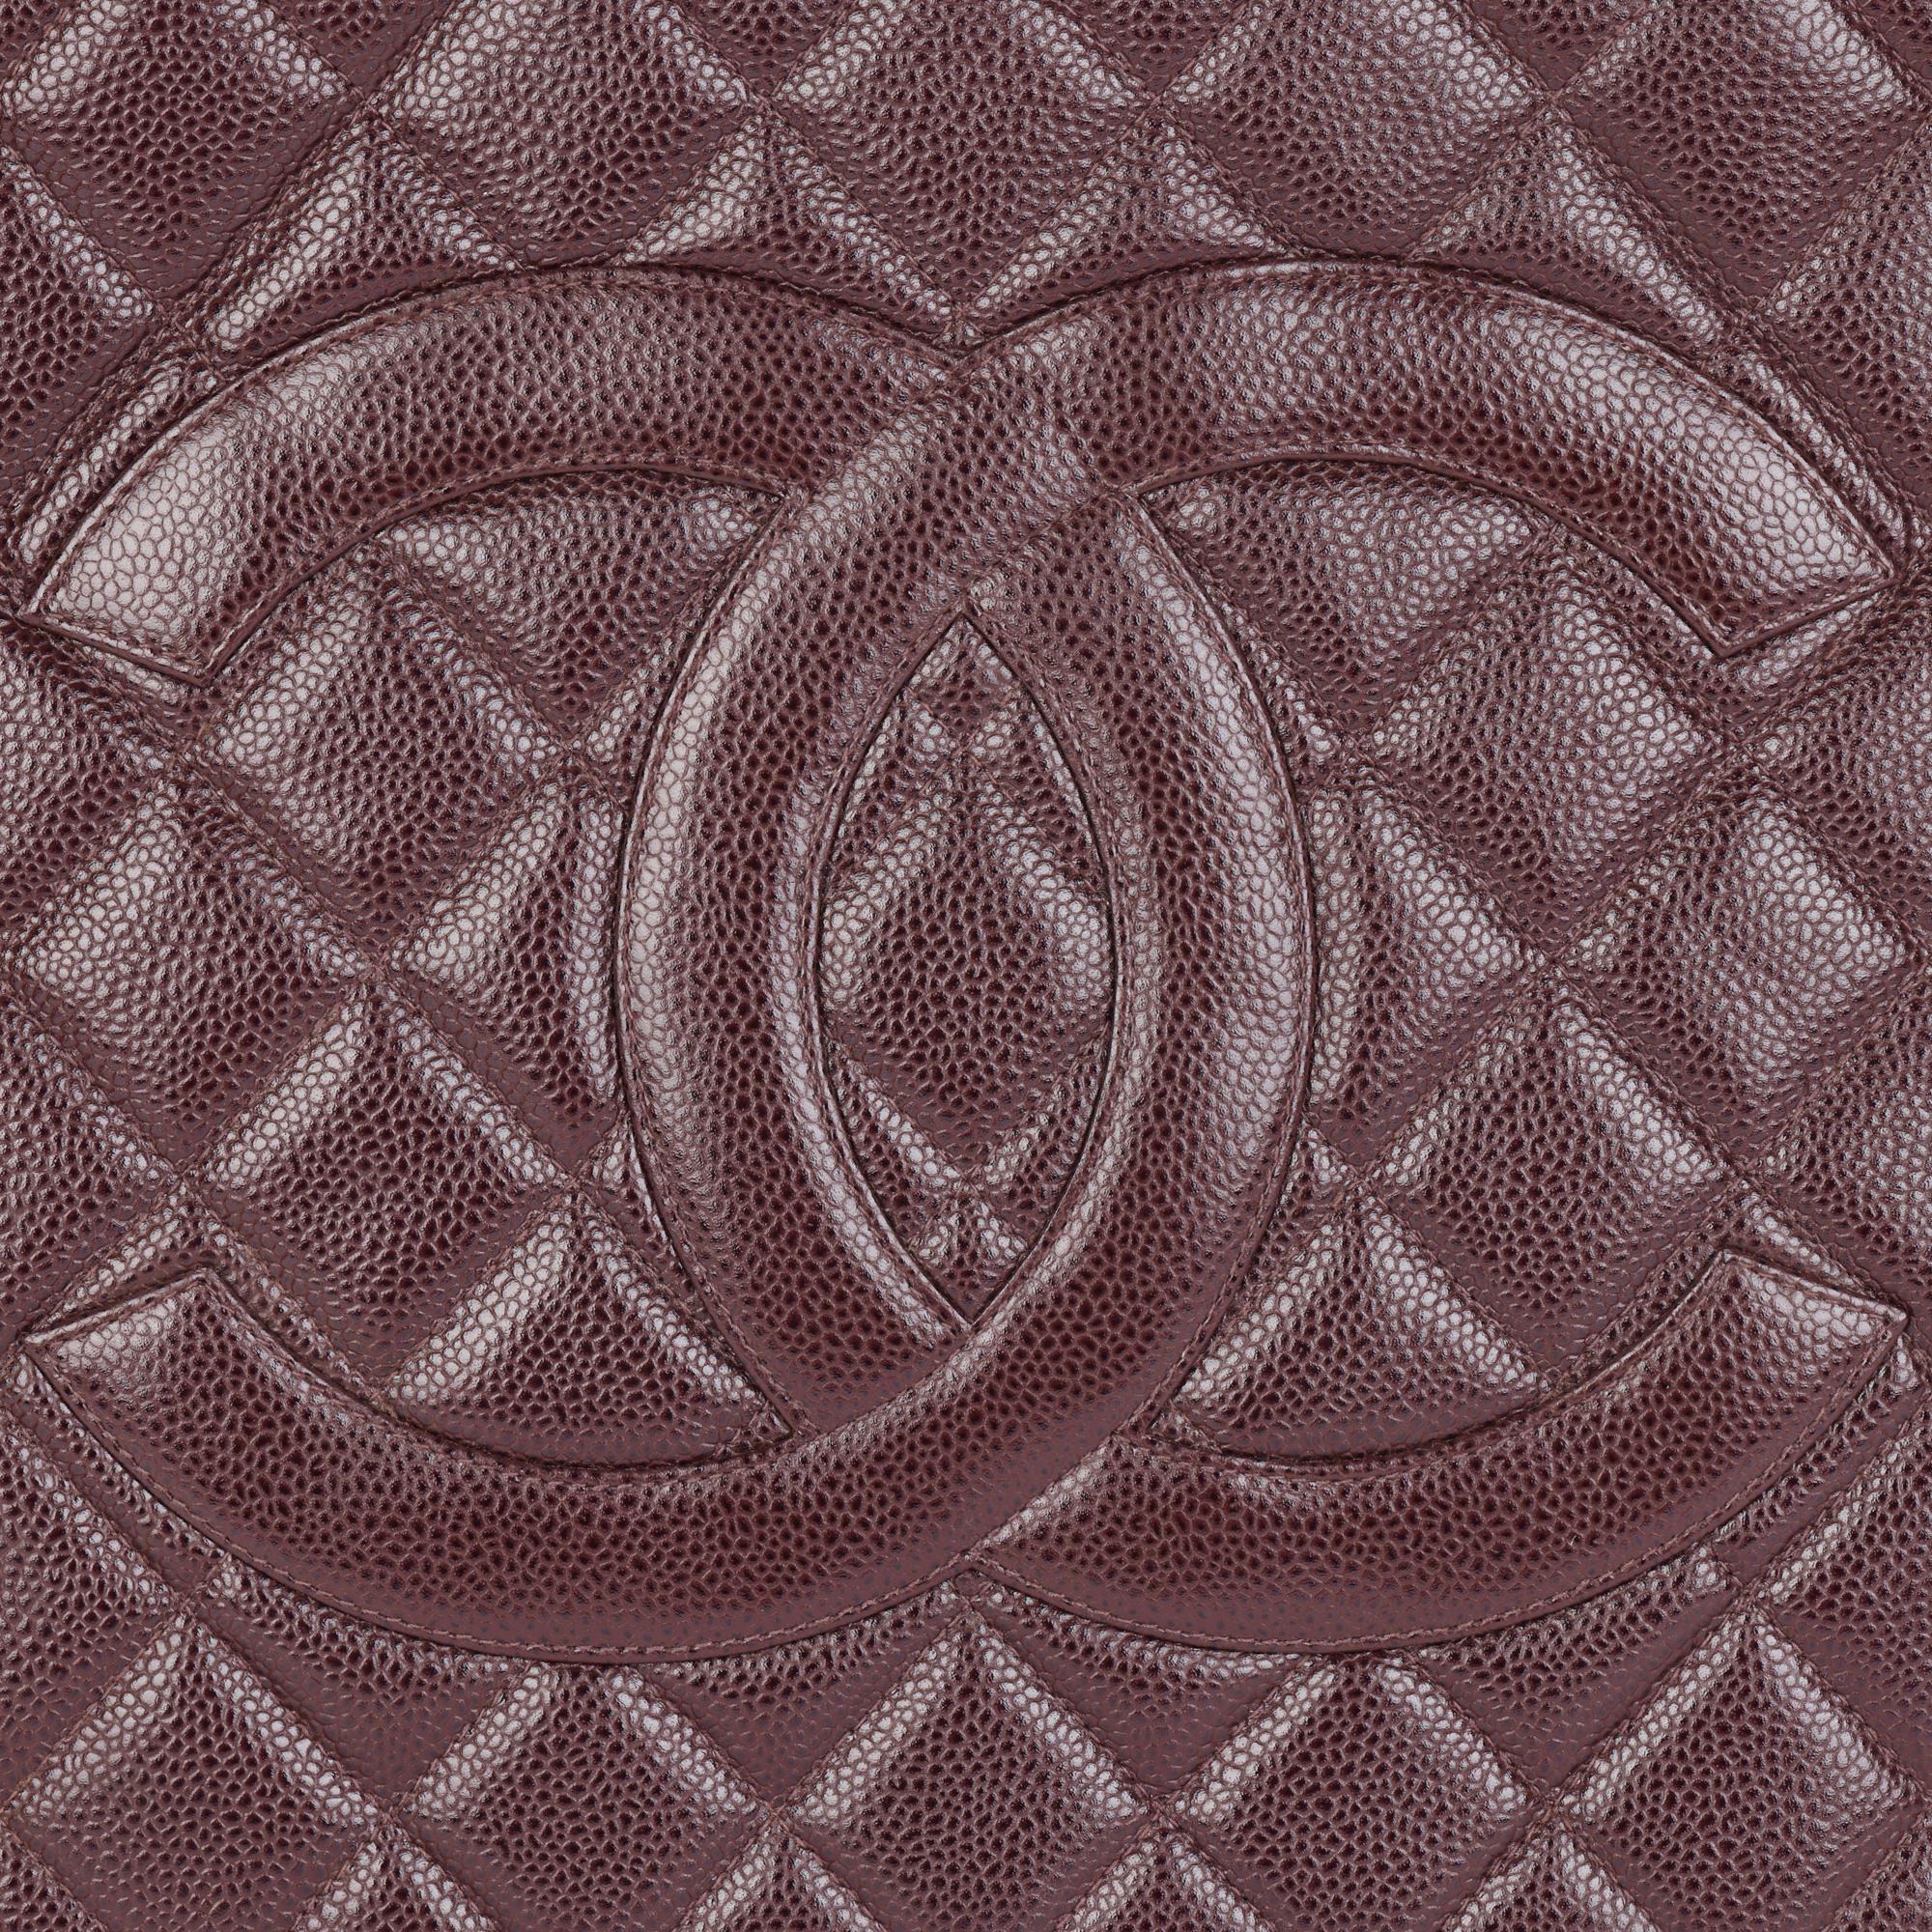 CHANEL Chocolate Brown Quilted Caviar Leather Vintage Medallion Tote 3